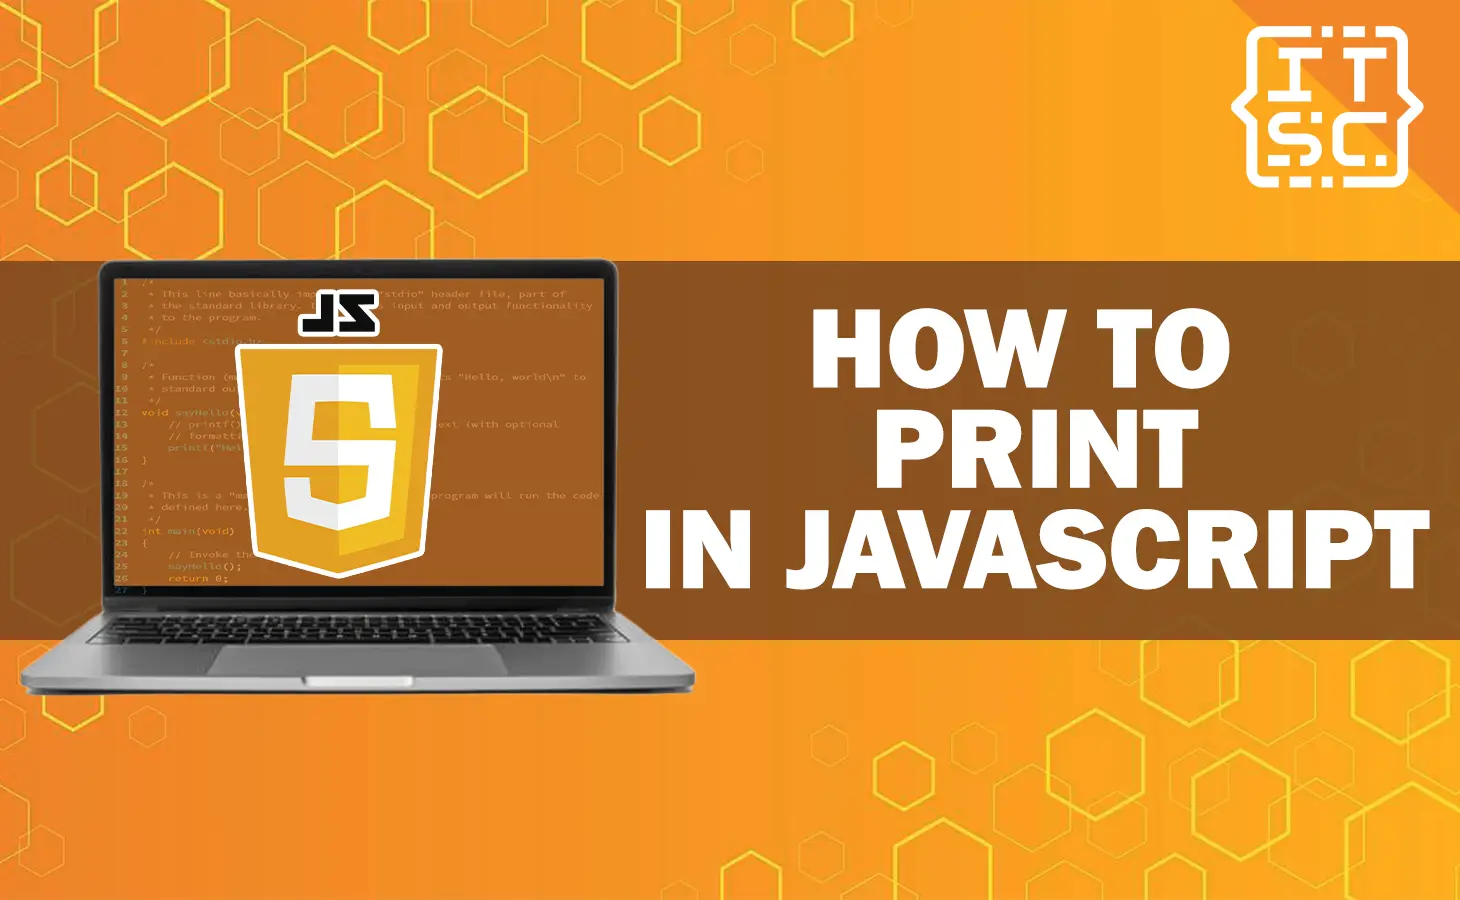 How to Print in JavaScript